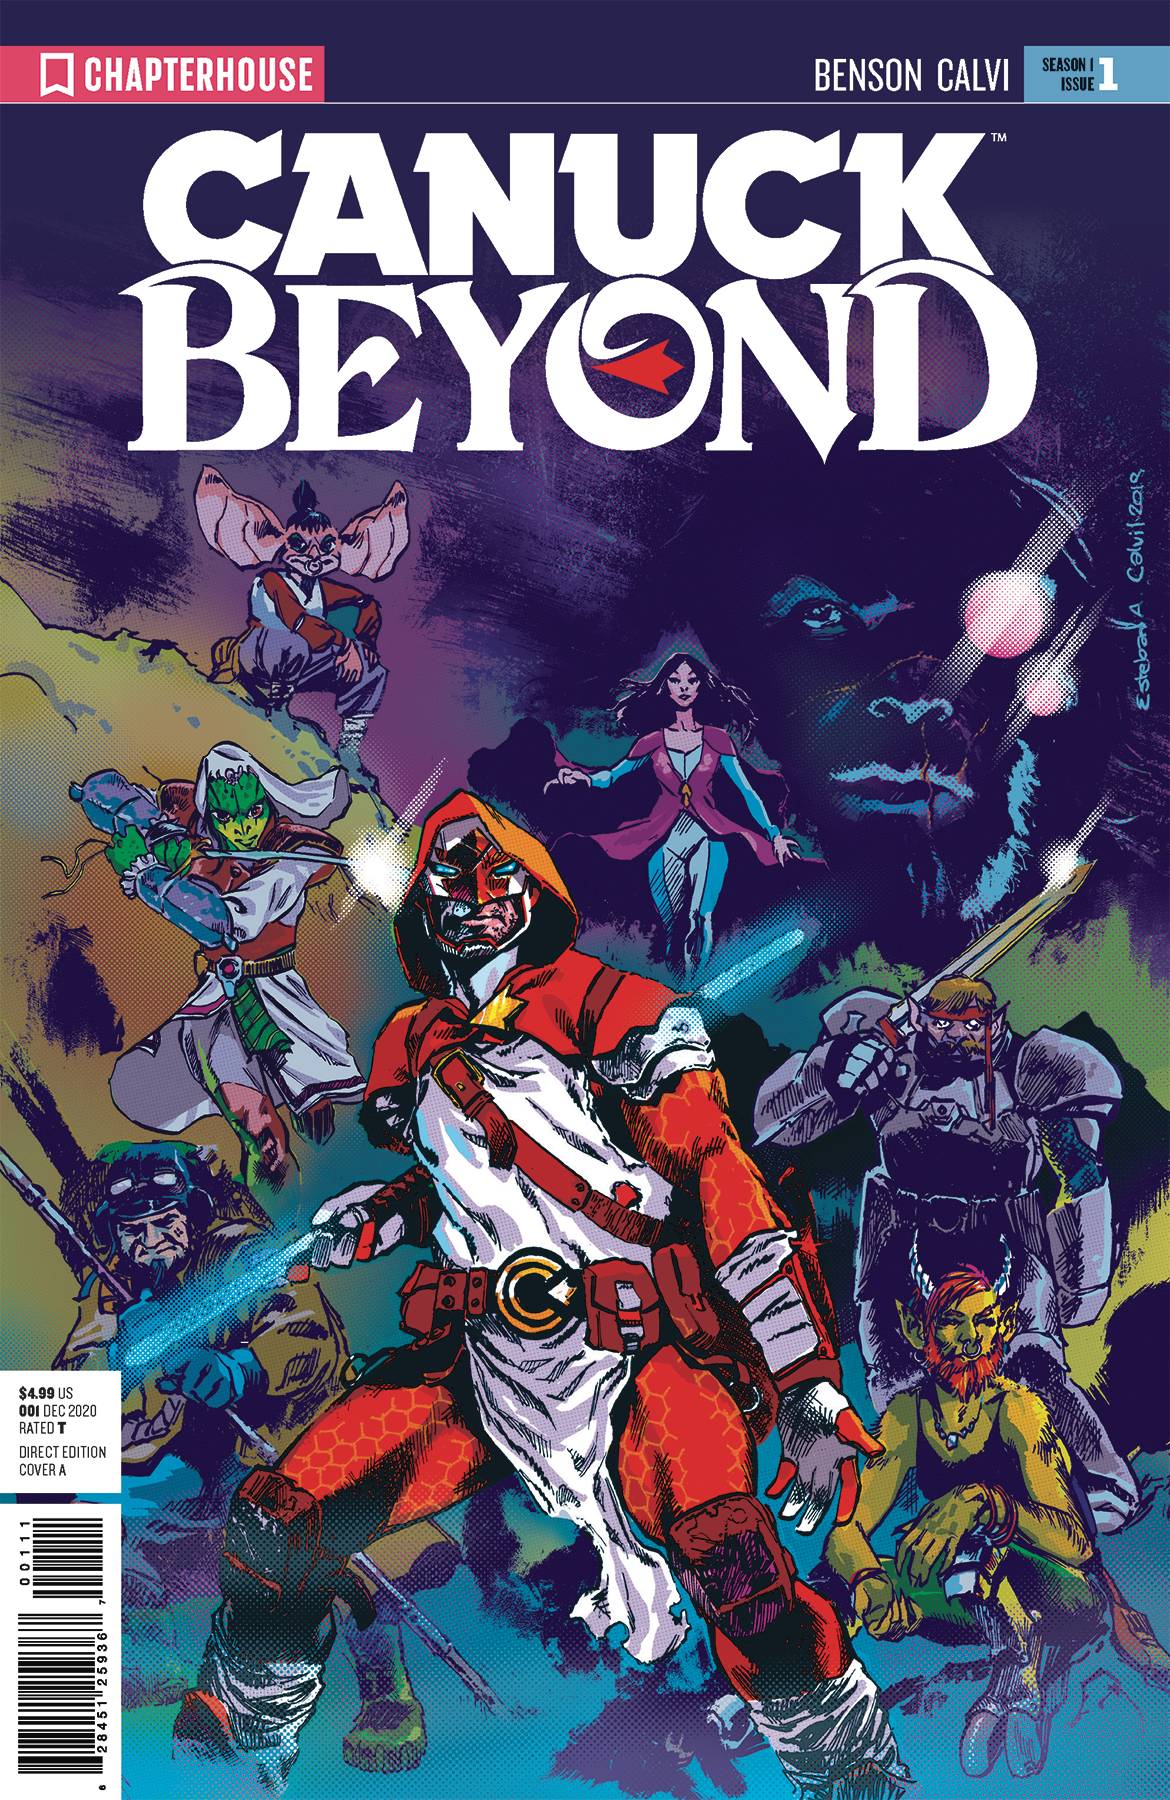 CANUCK BEYOND #1 | L.A. Mood Comics and Games